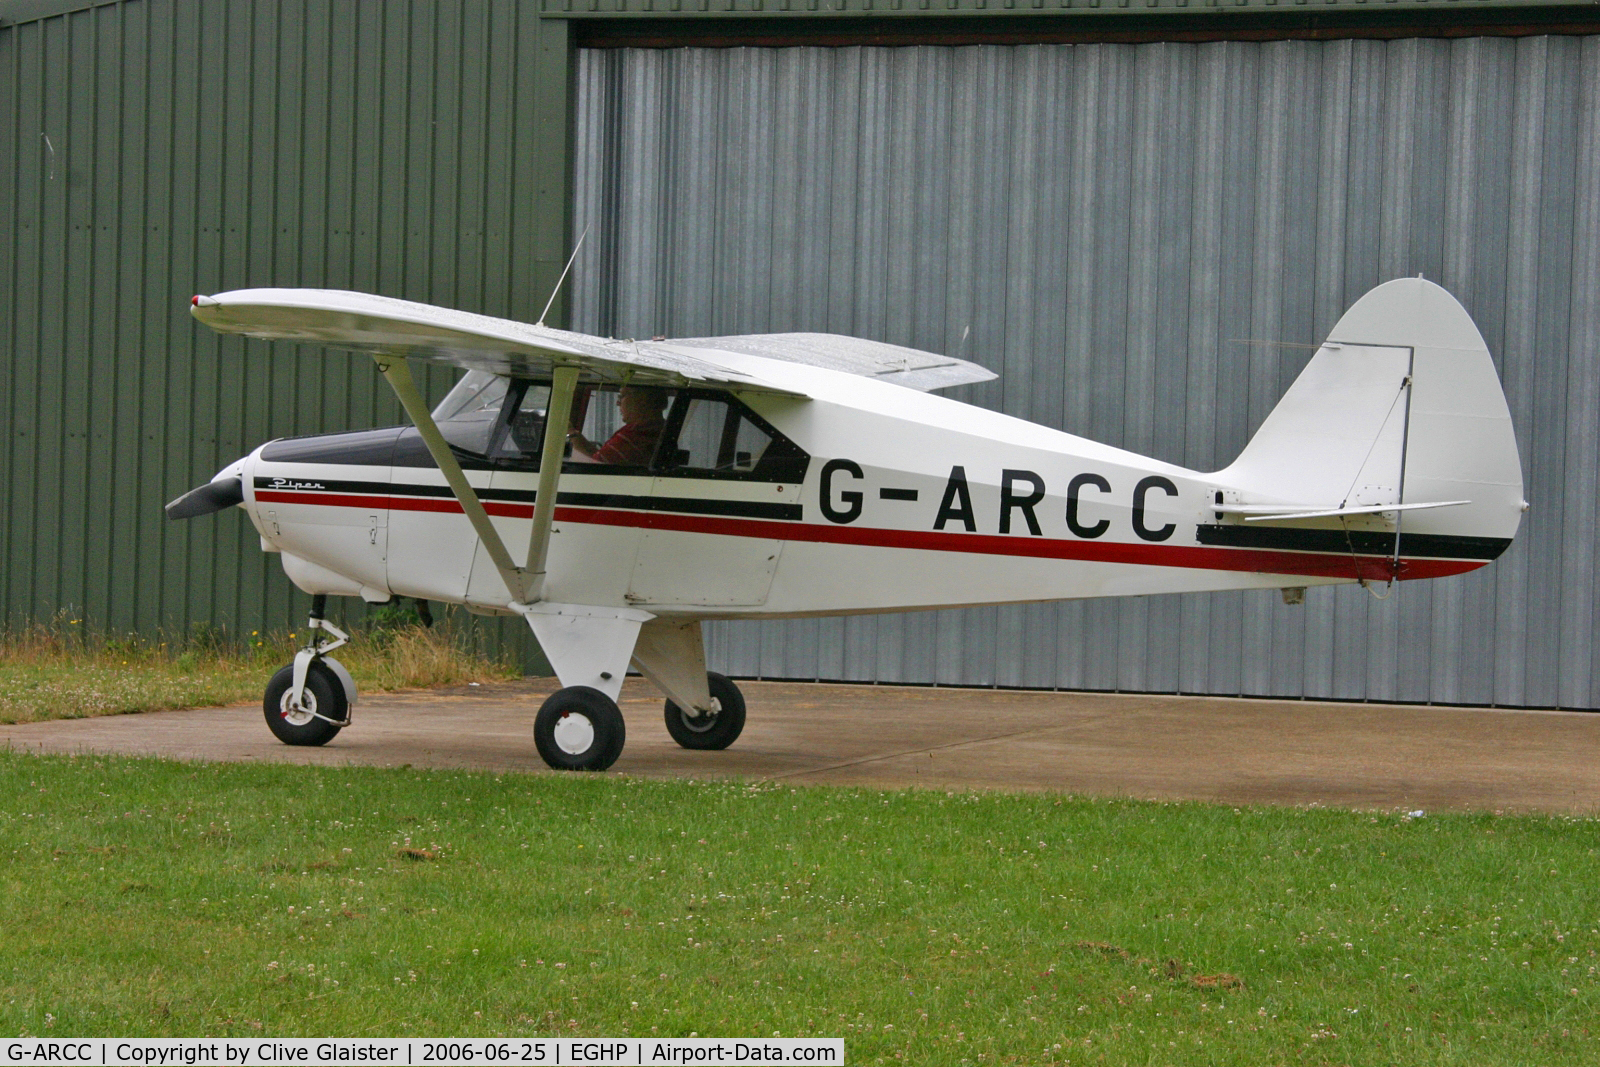 G-ARCC, 1956 Piper PA-22-150 Tri-Pacer C/N 22-4006, Ex: N4853A>G-ARCC. De-registered see http://tinyurl.com/6f4the2